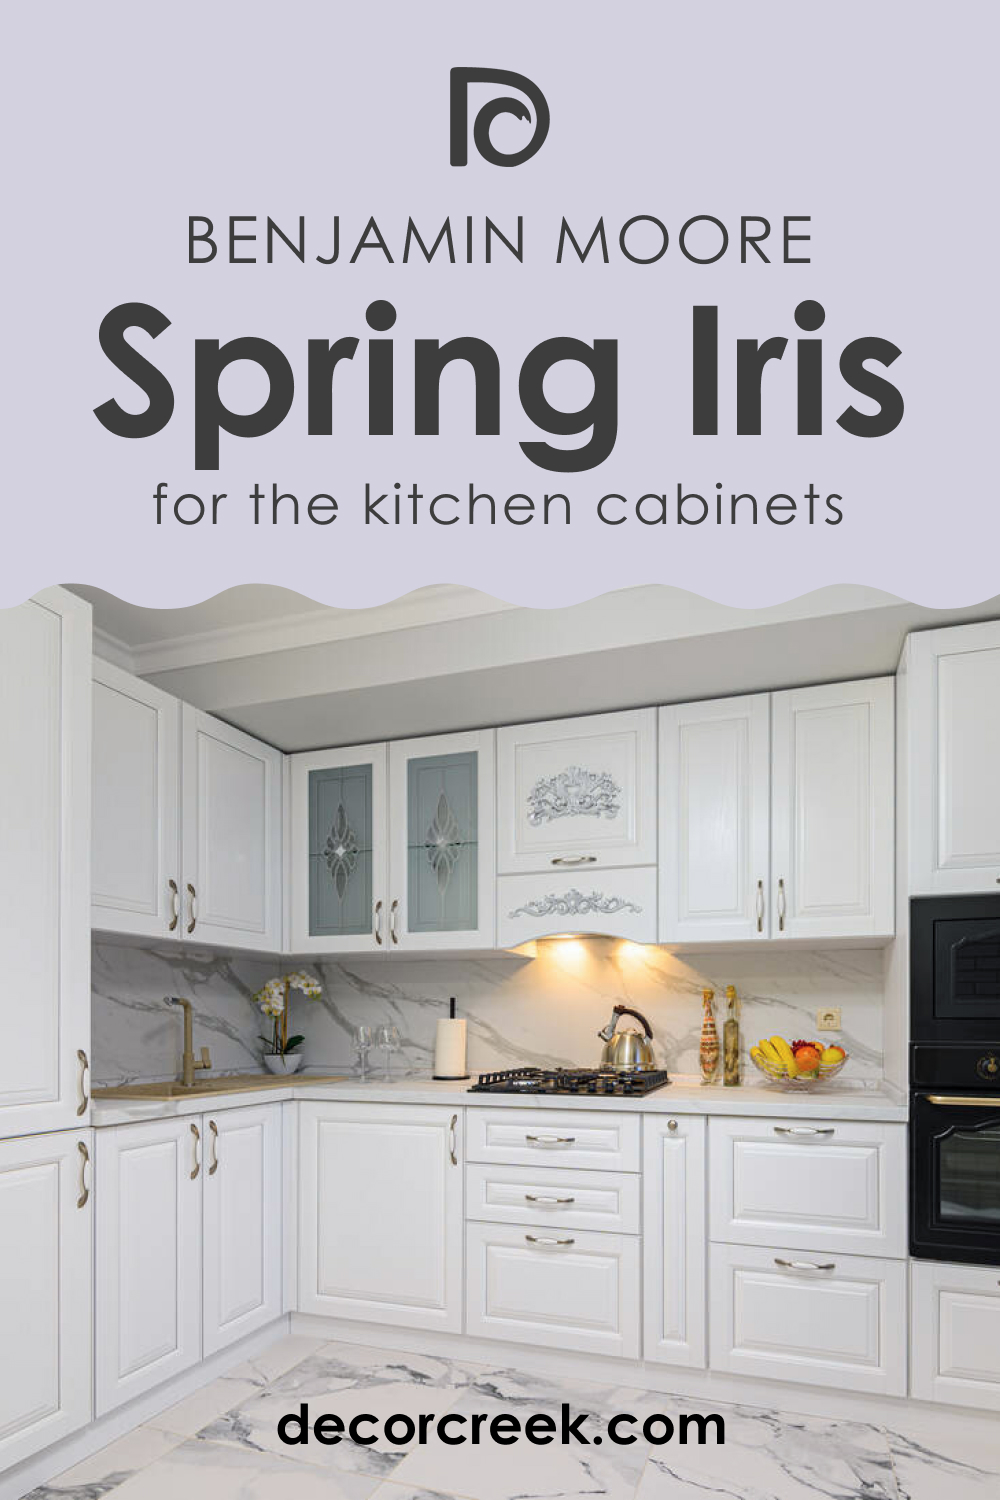 How to Use Spring Iris 1402 on Kitchen Cabinets?